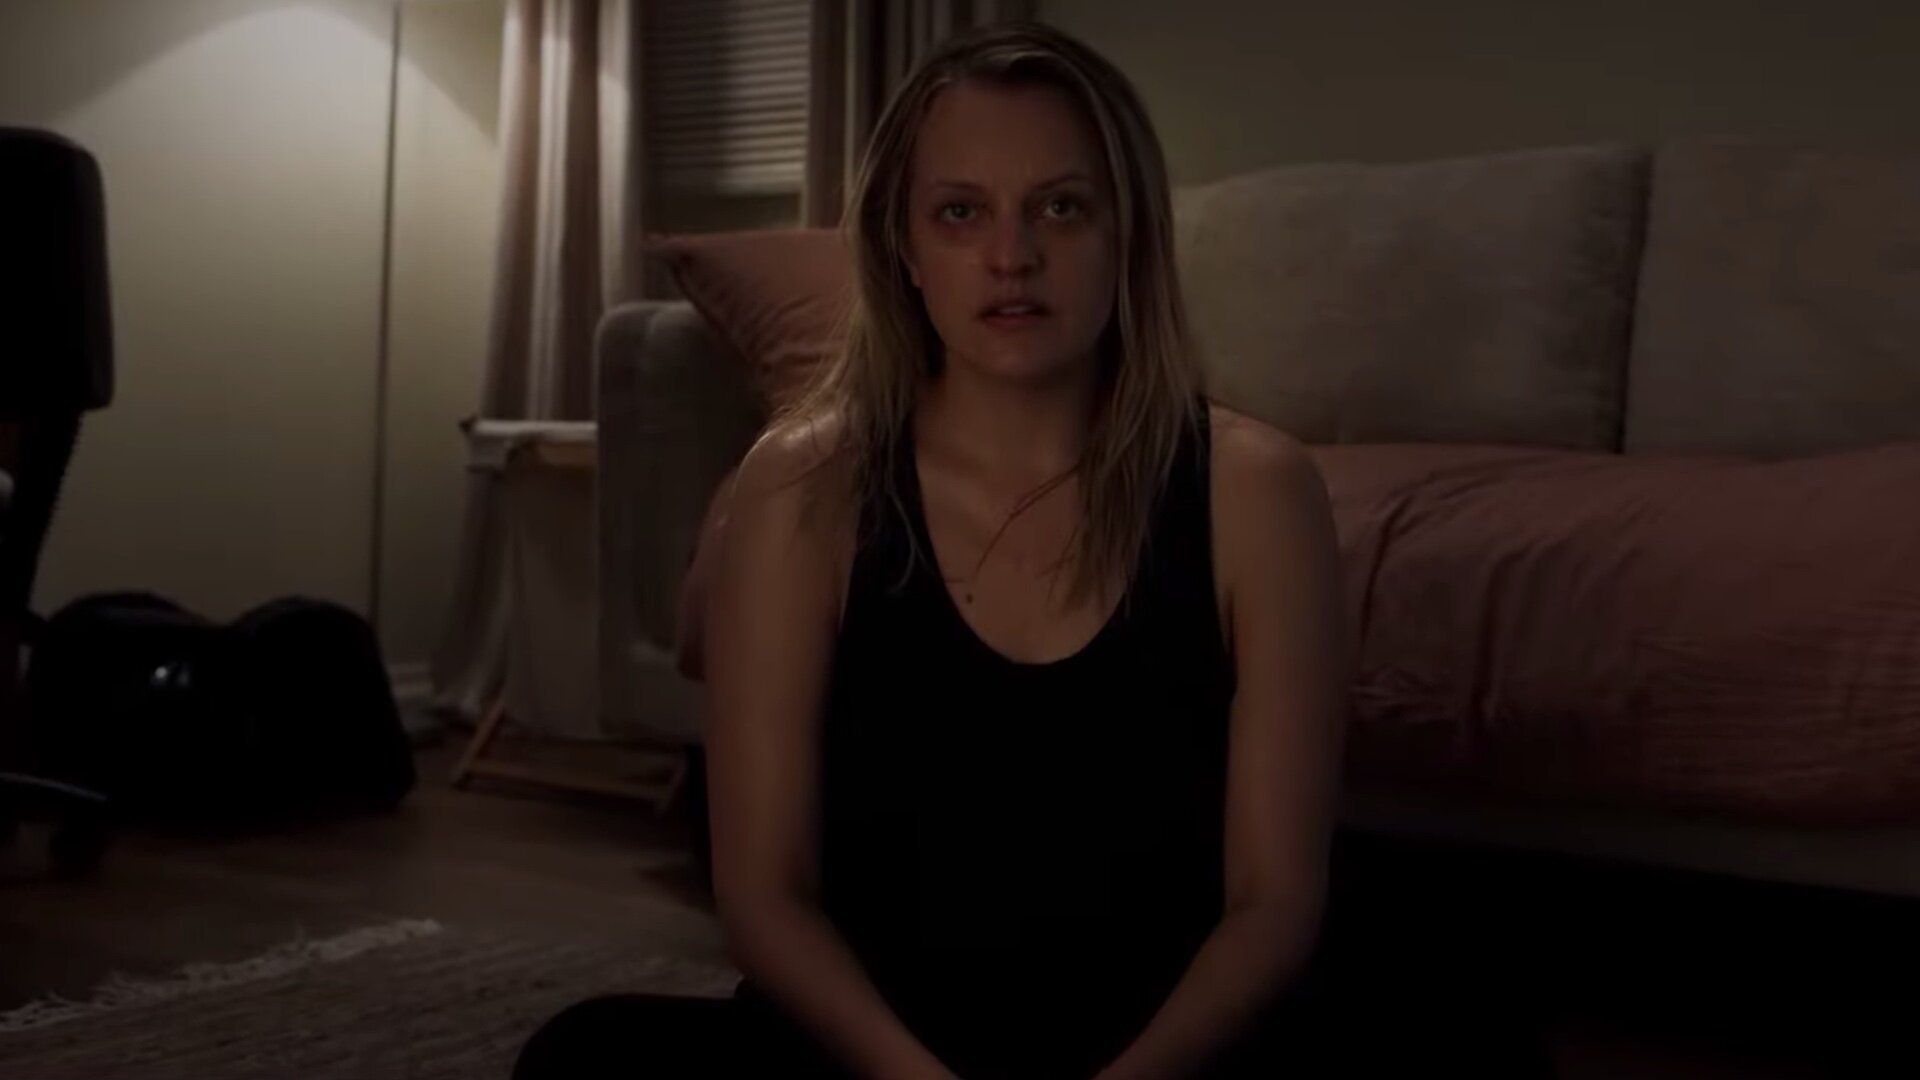 Elisabeth Moss Is Driven To Madness In This Messed Up Trailer For